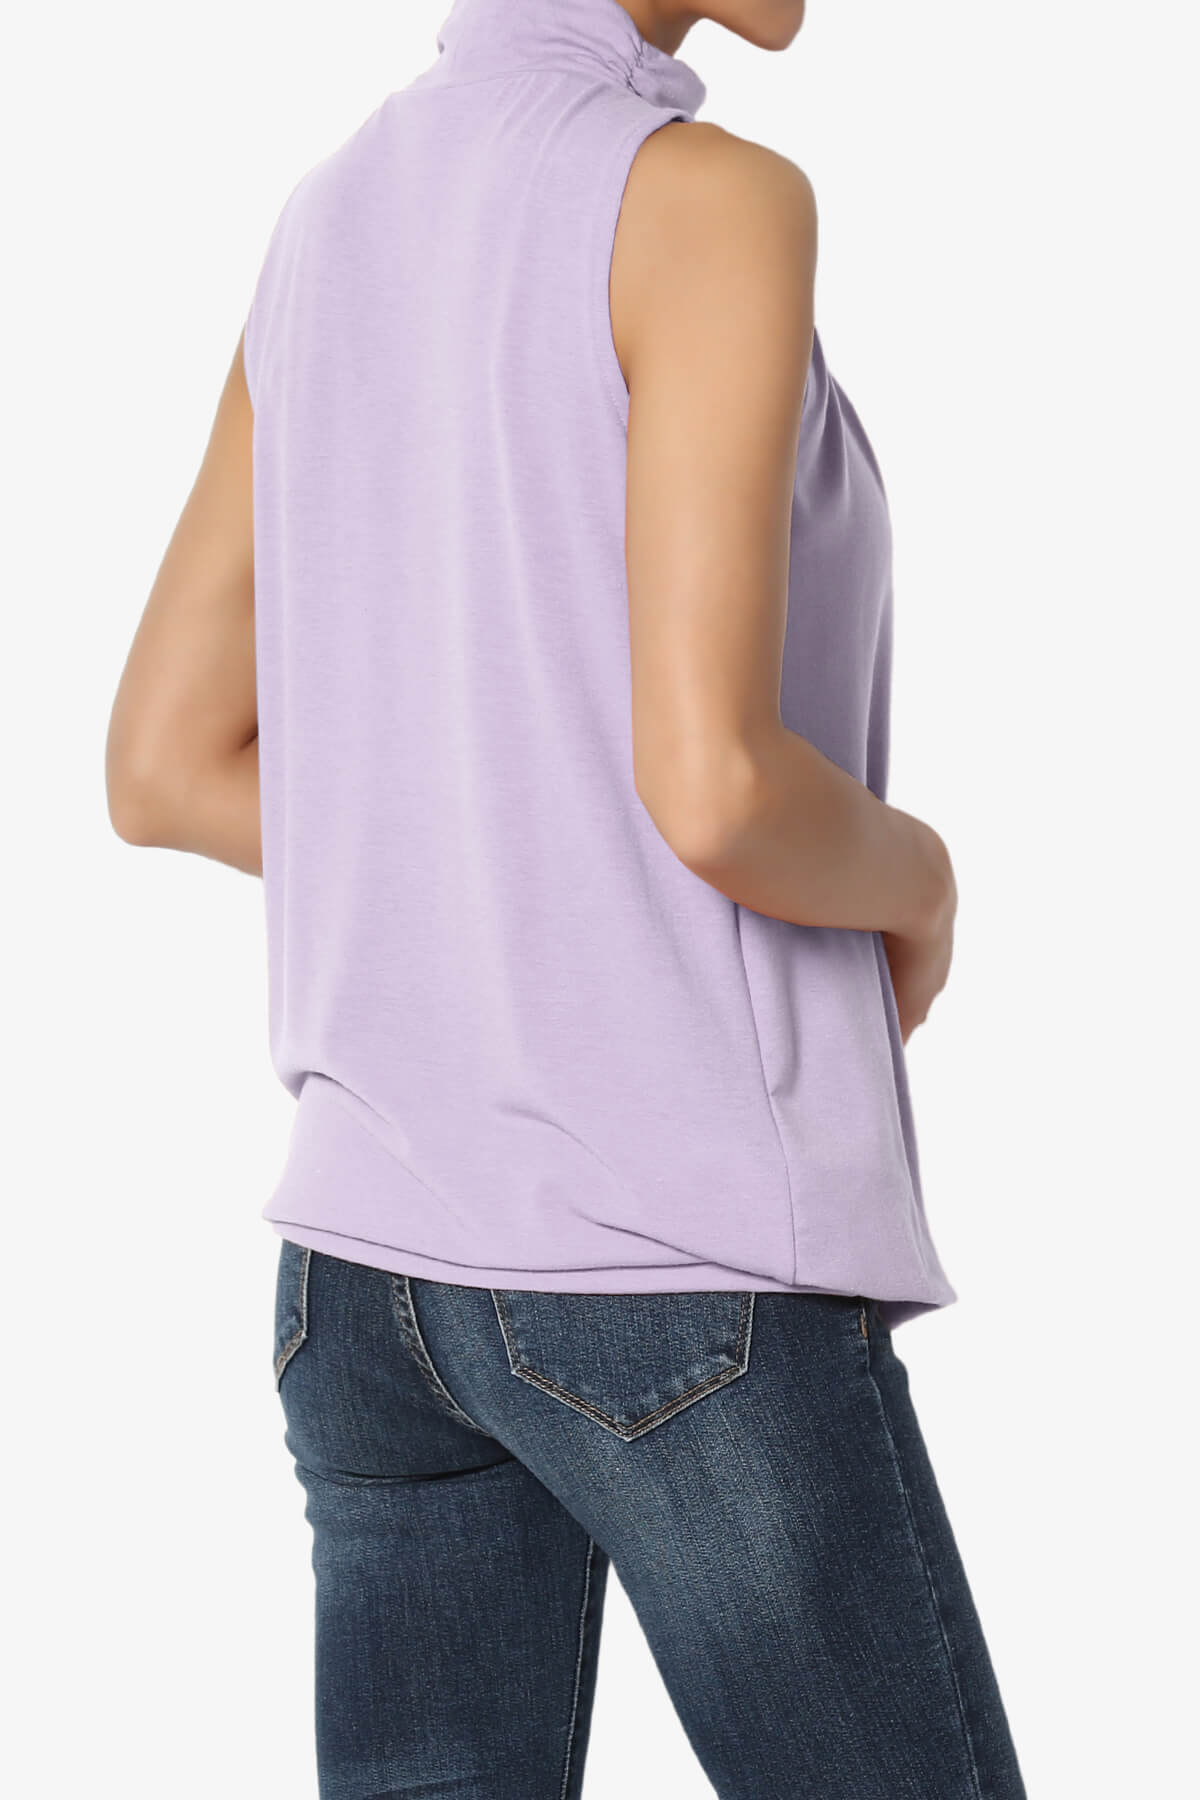 Load image into Gallery viewer, Jibbitz Sleeveless Mock Neck Pleated Top DUSTY LAVENDER_4
